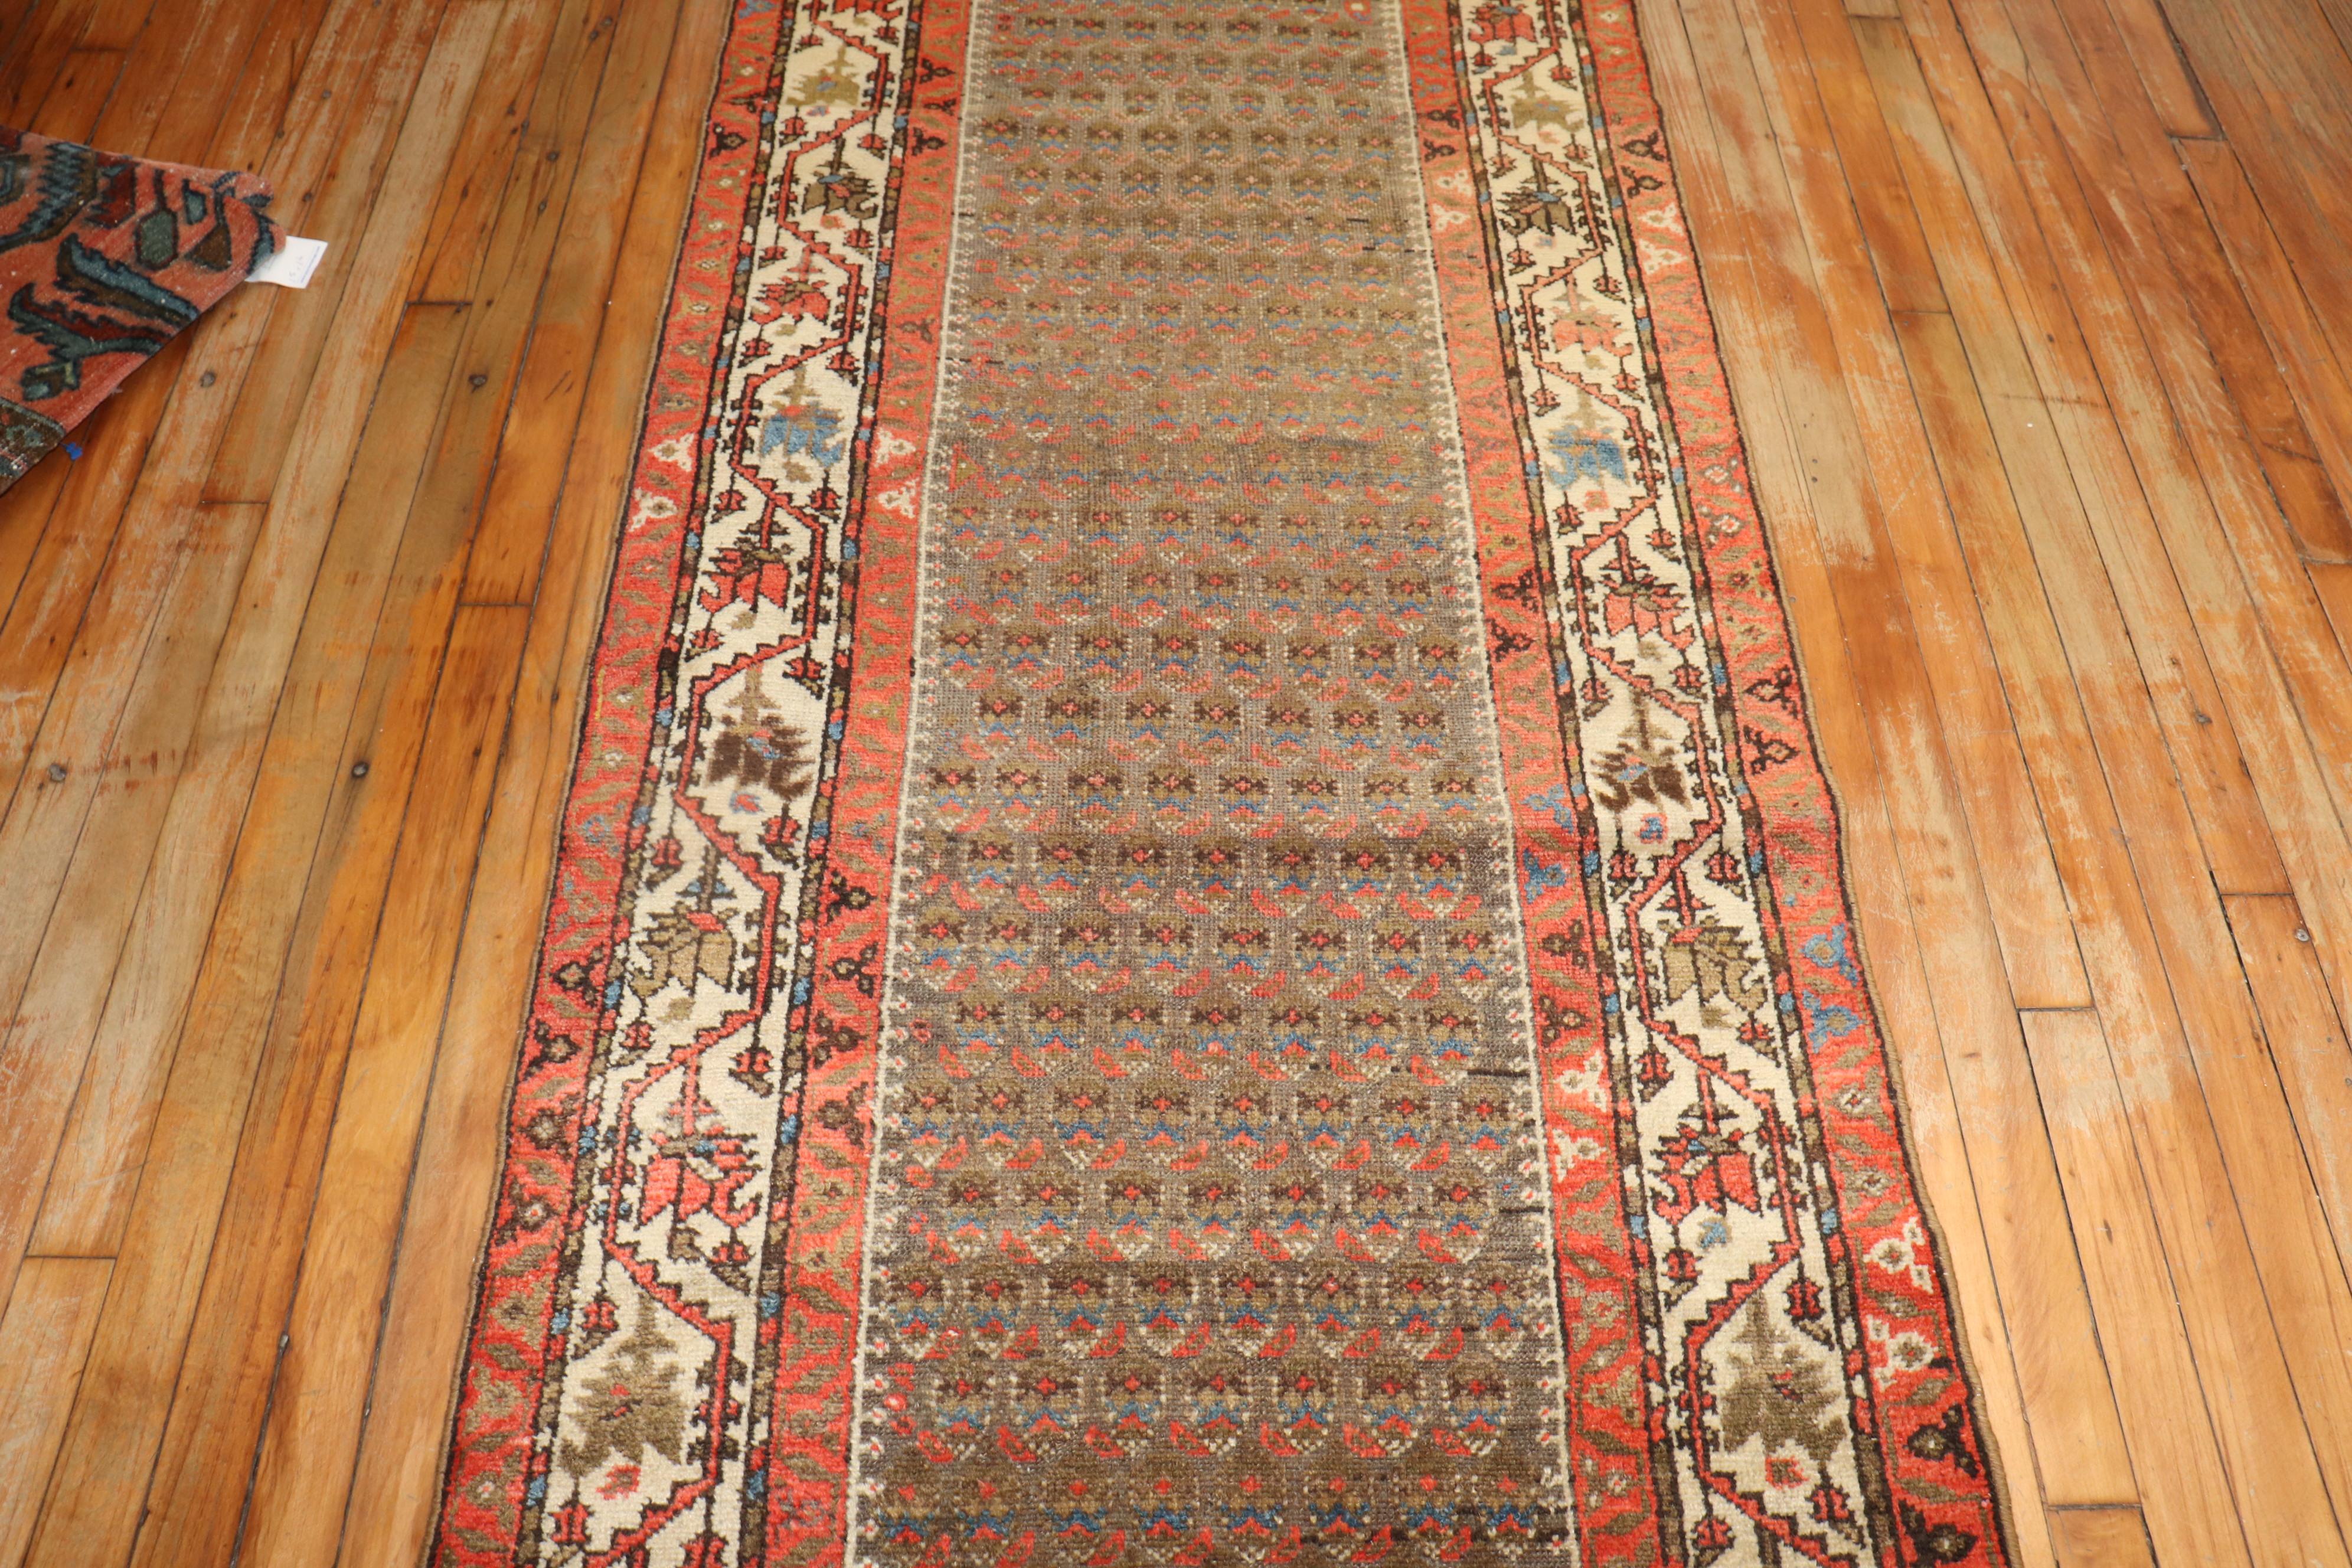 Early 20th-century Persian Malayer rug in predominantly brown

Measures: 3' x 17'10''

